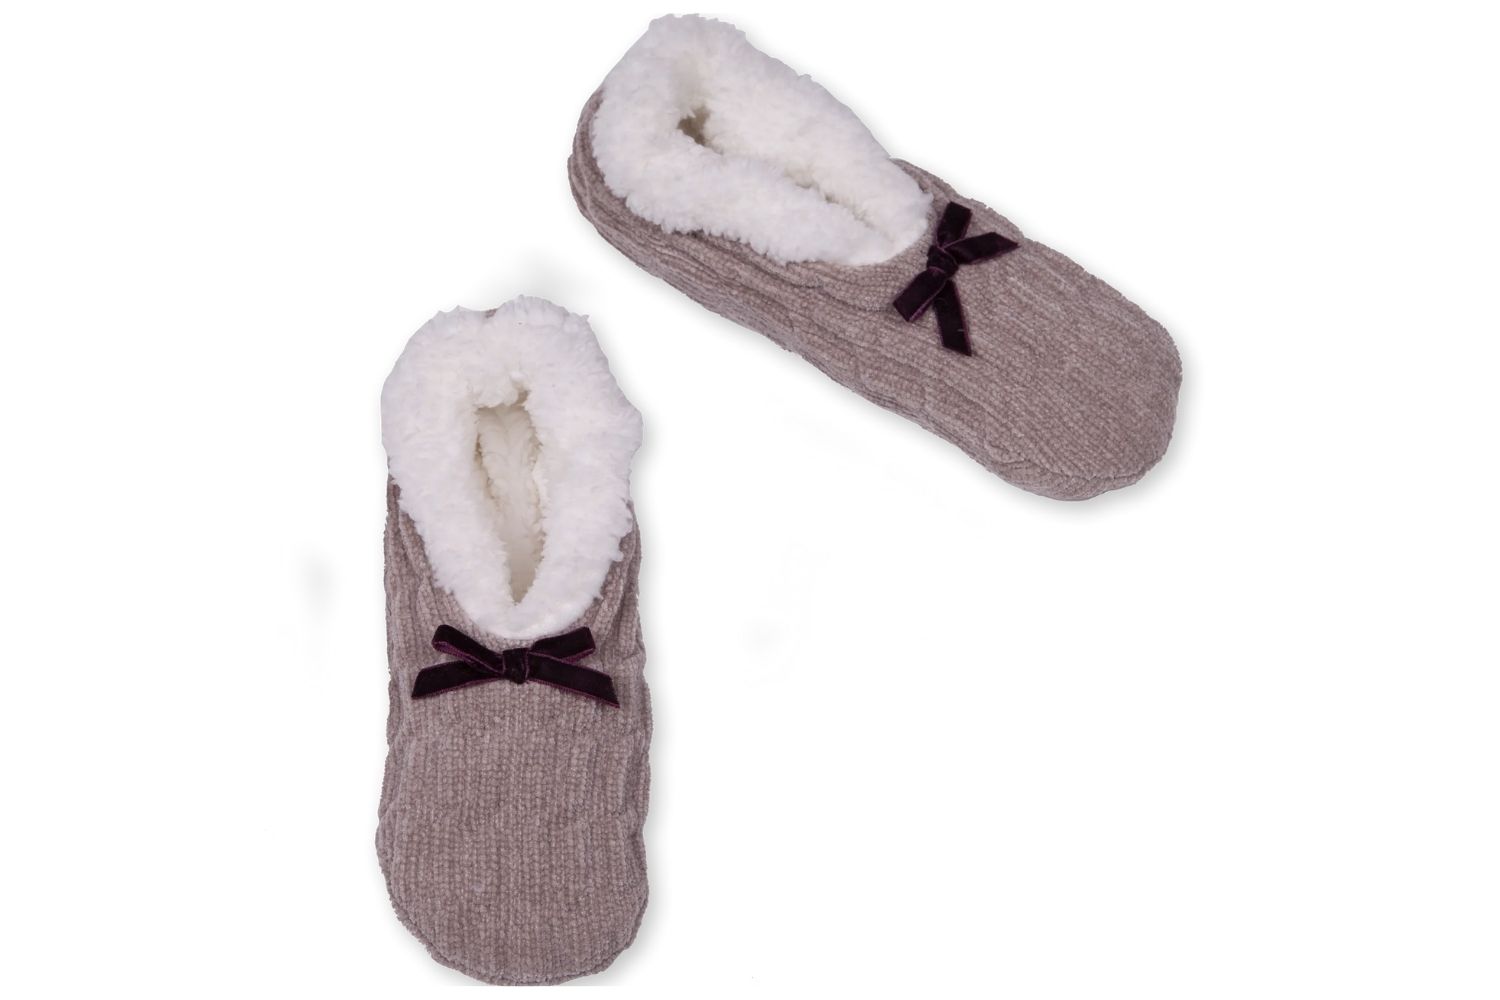 12-extraordinary-facts-about-slipper-socks